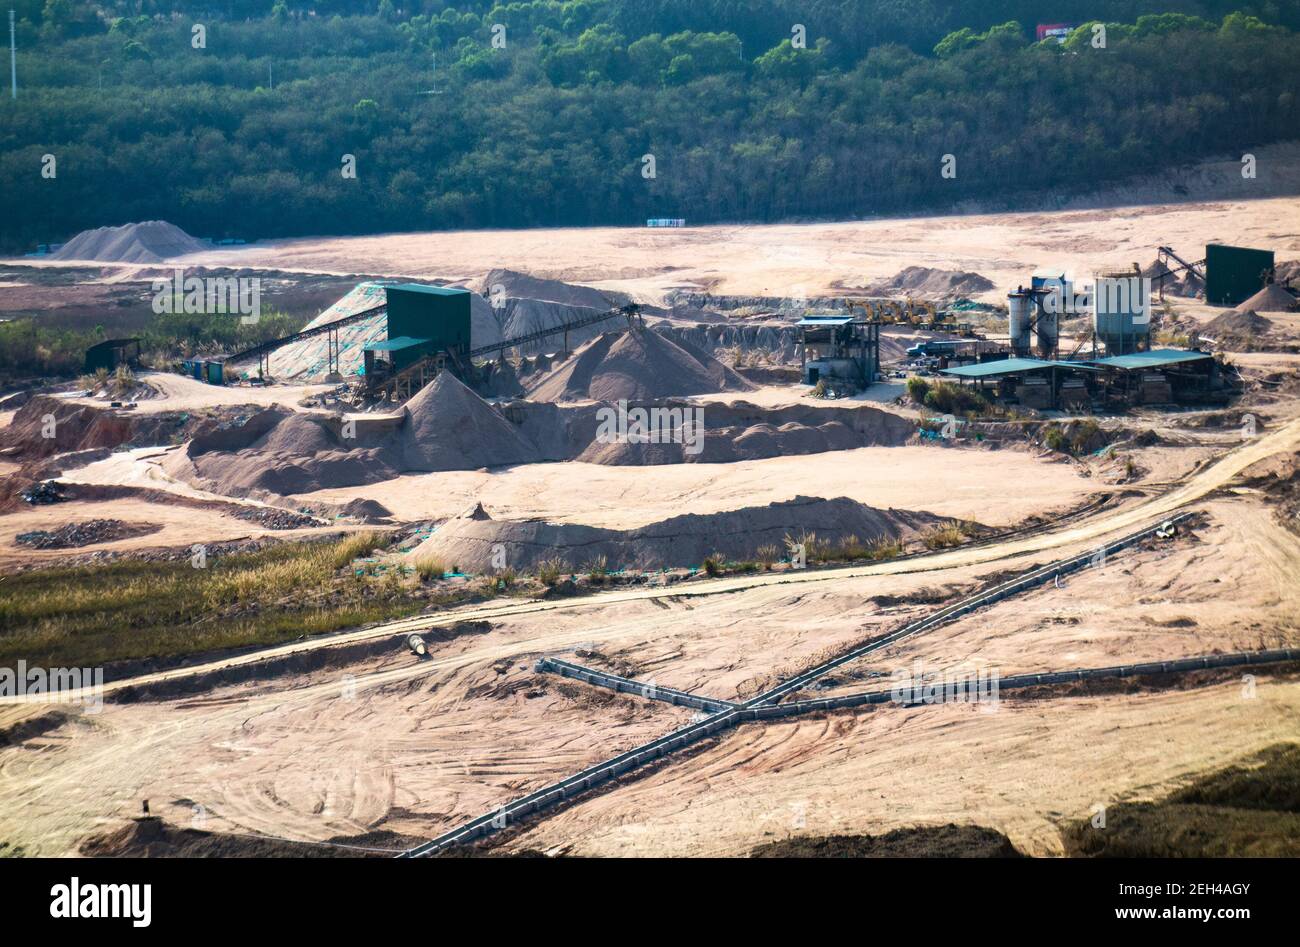 Facility to process sand in Shenzhen, China Stock Photo